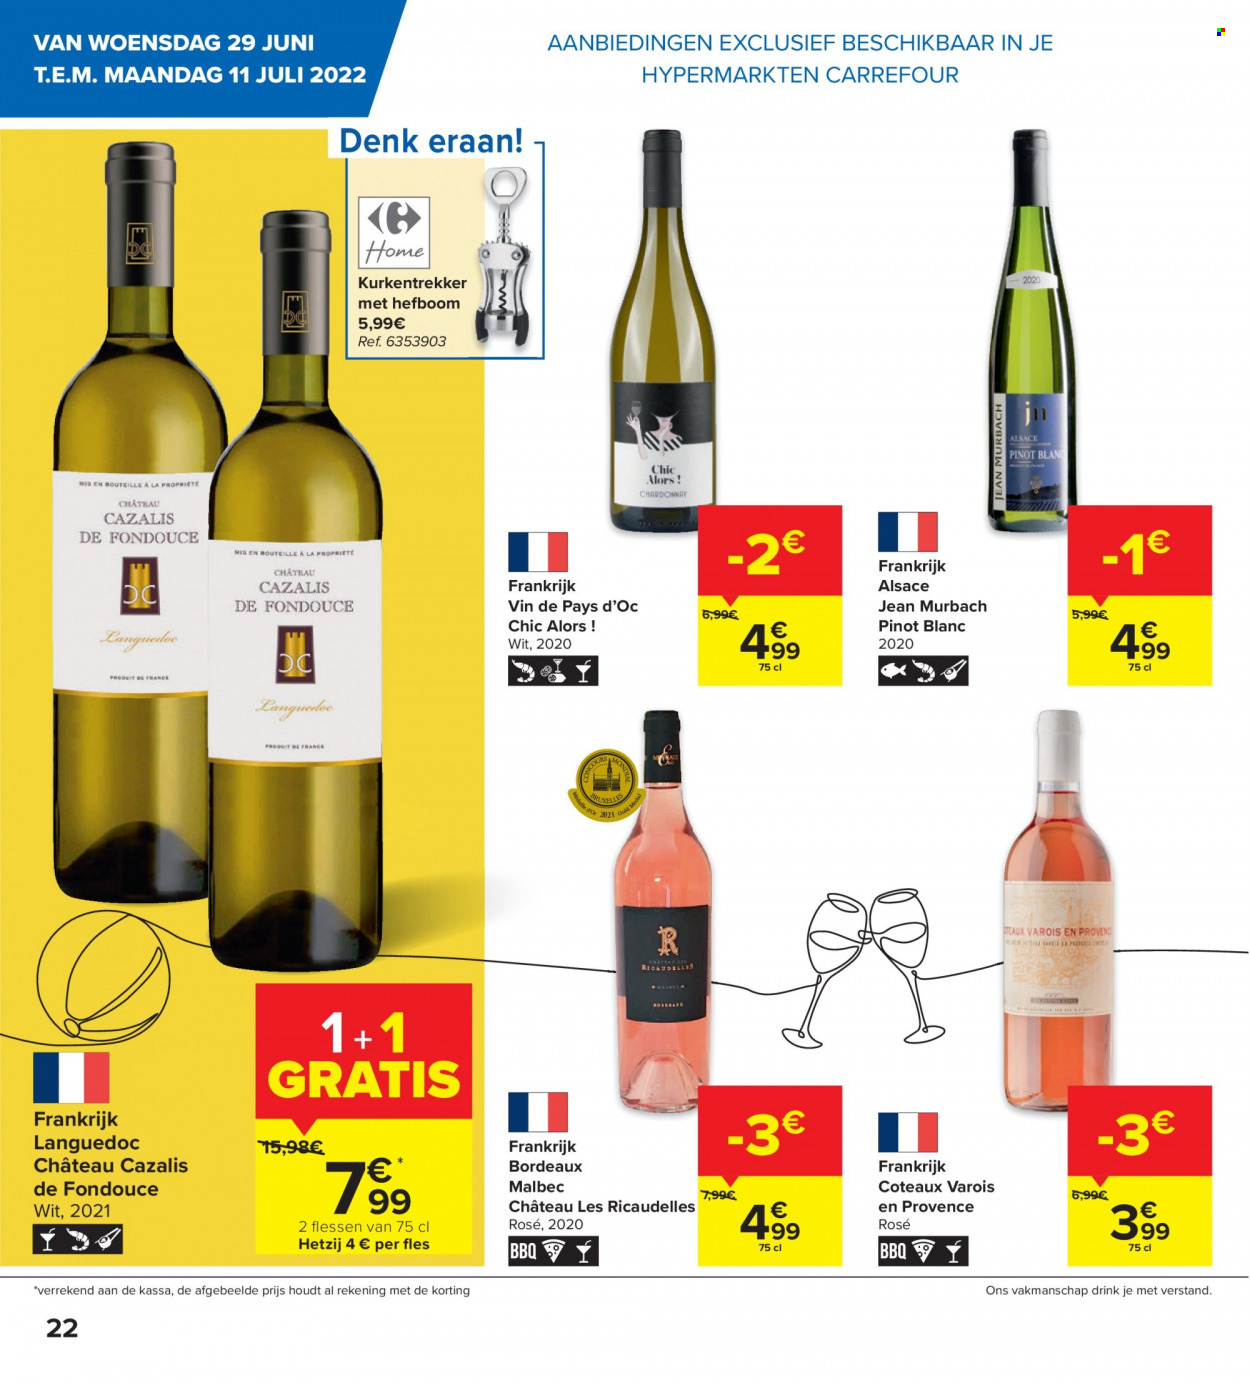 Catalogue Carrefour hypermarkt - 29.6.2022 - 11.7.2022. Page 2.